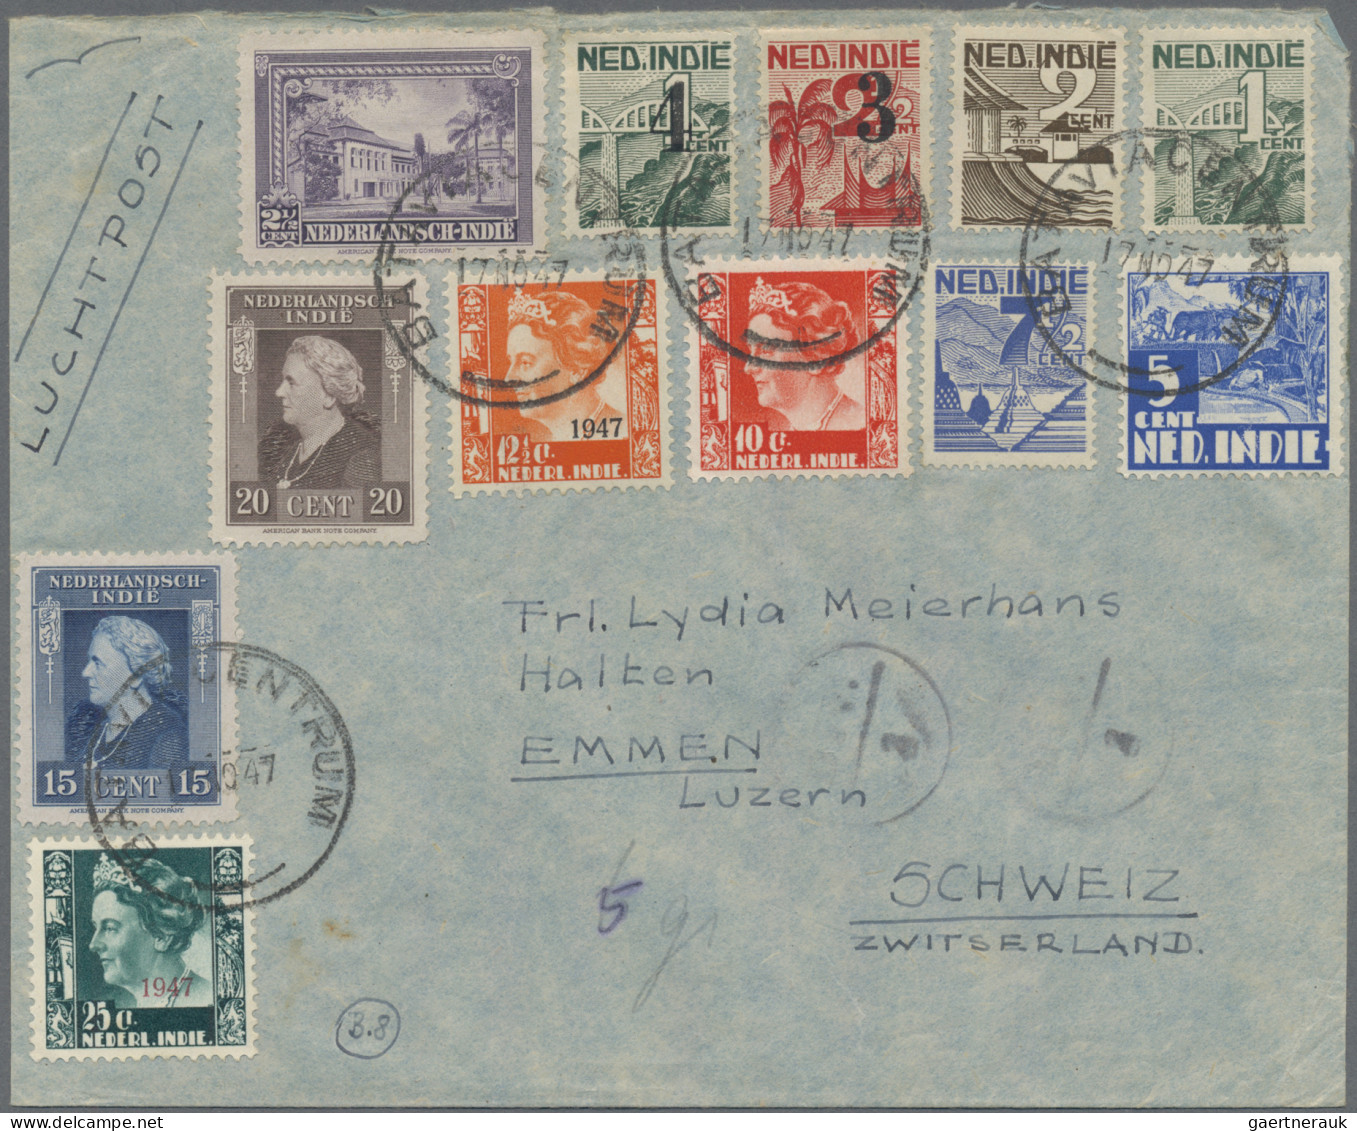 Dutch Colonies: 1930/1960 (ca.), Dutch colonies/Netherlands incl. some incoming